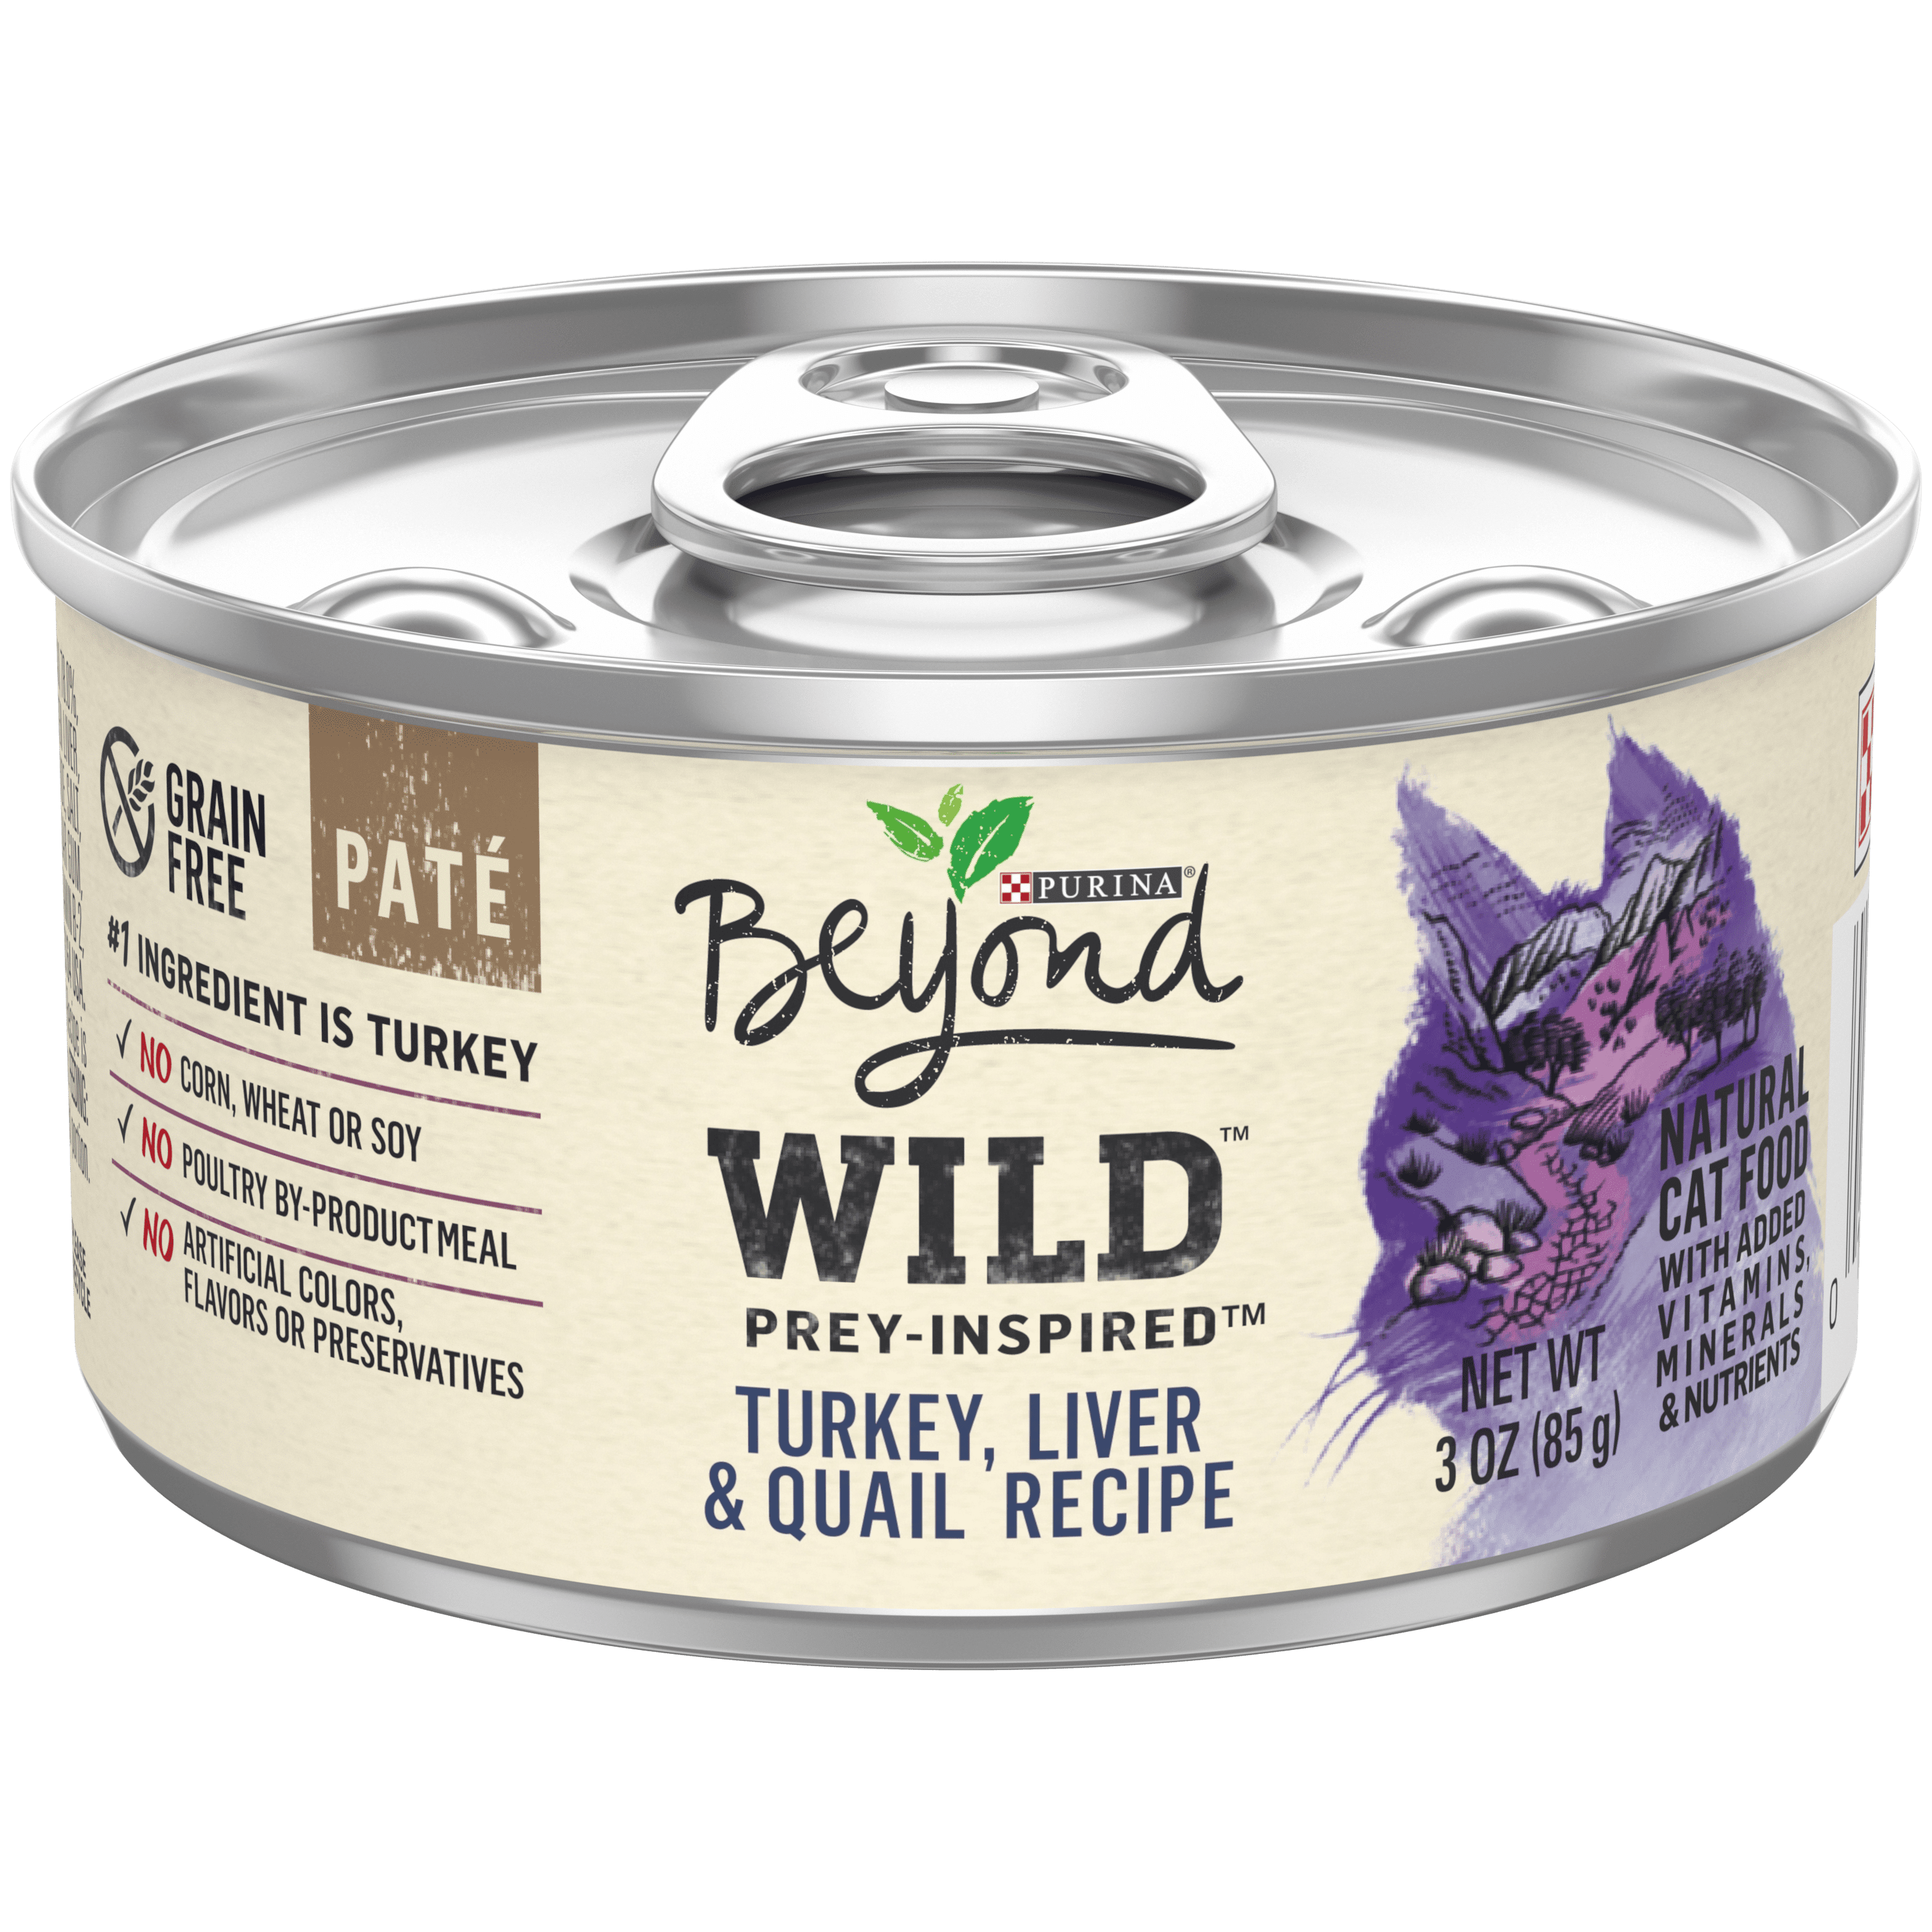 Purina Beyond Grain Free, Natural, High Protein Pate Wet Cat Food, WILD